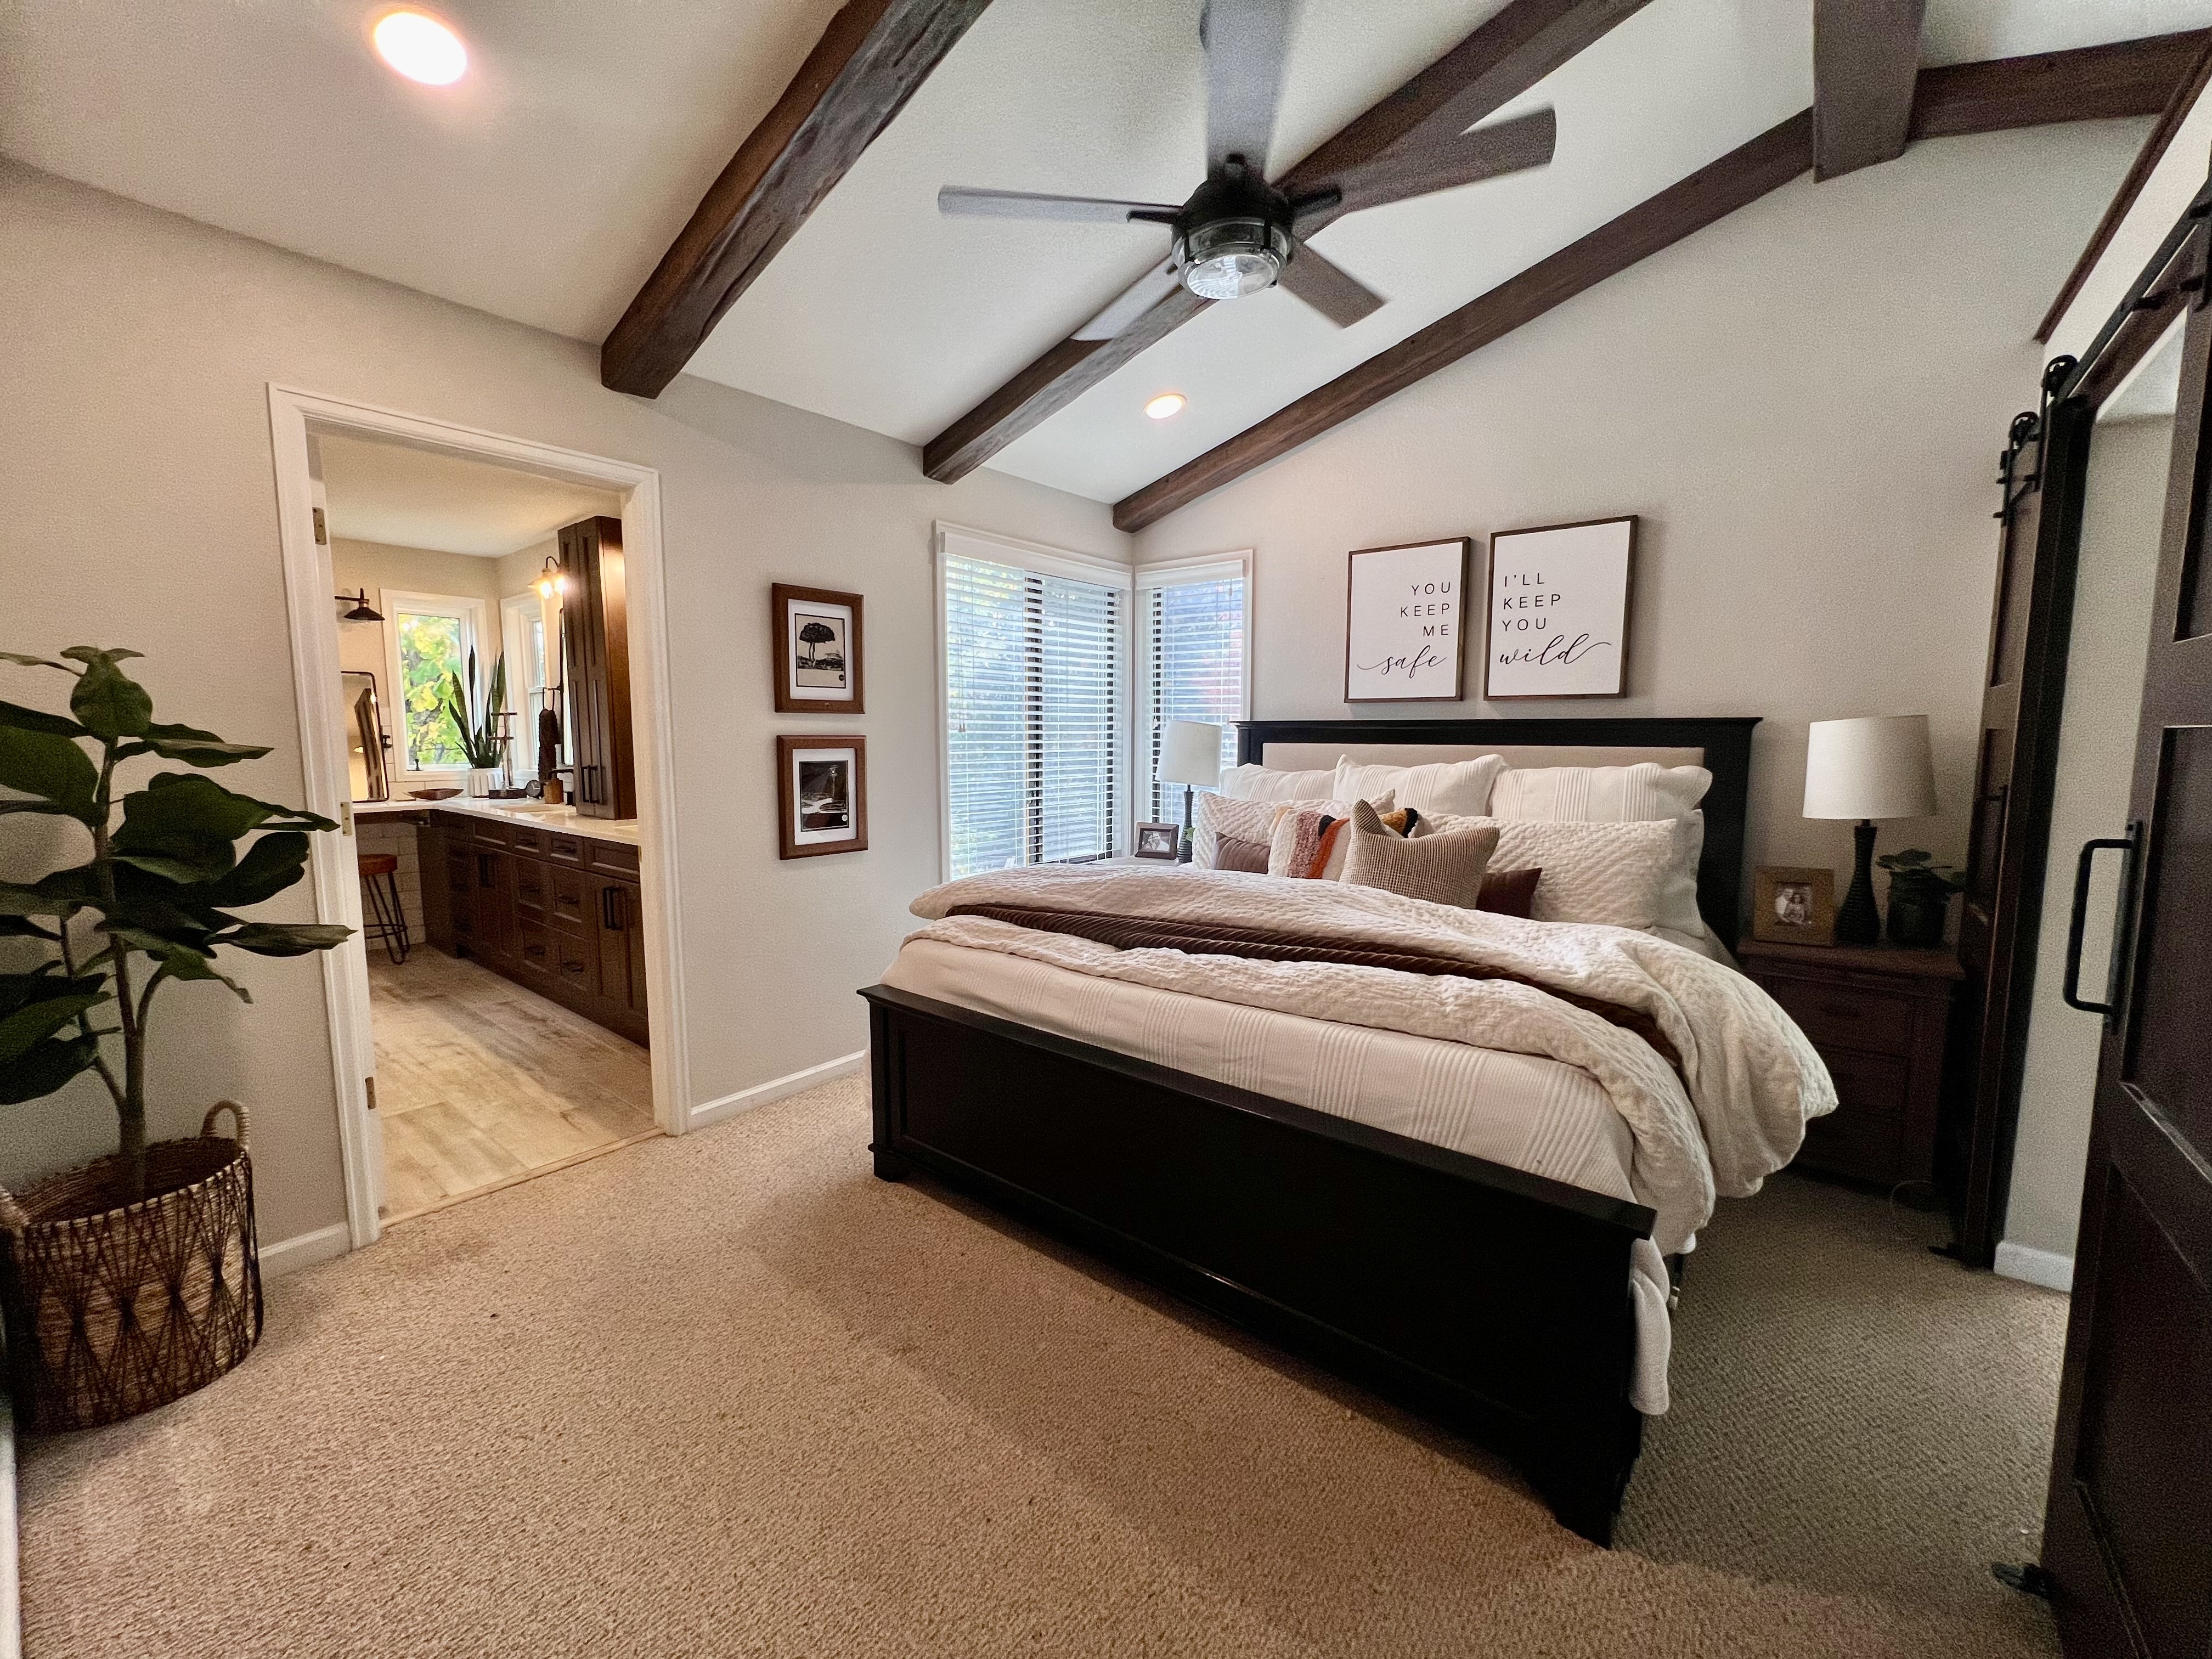 Bedroom with large bed, plants, and exposed faux wood beams.